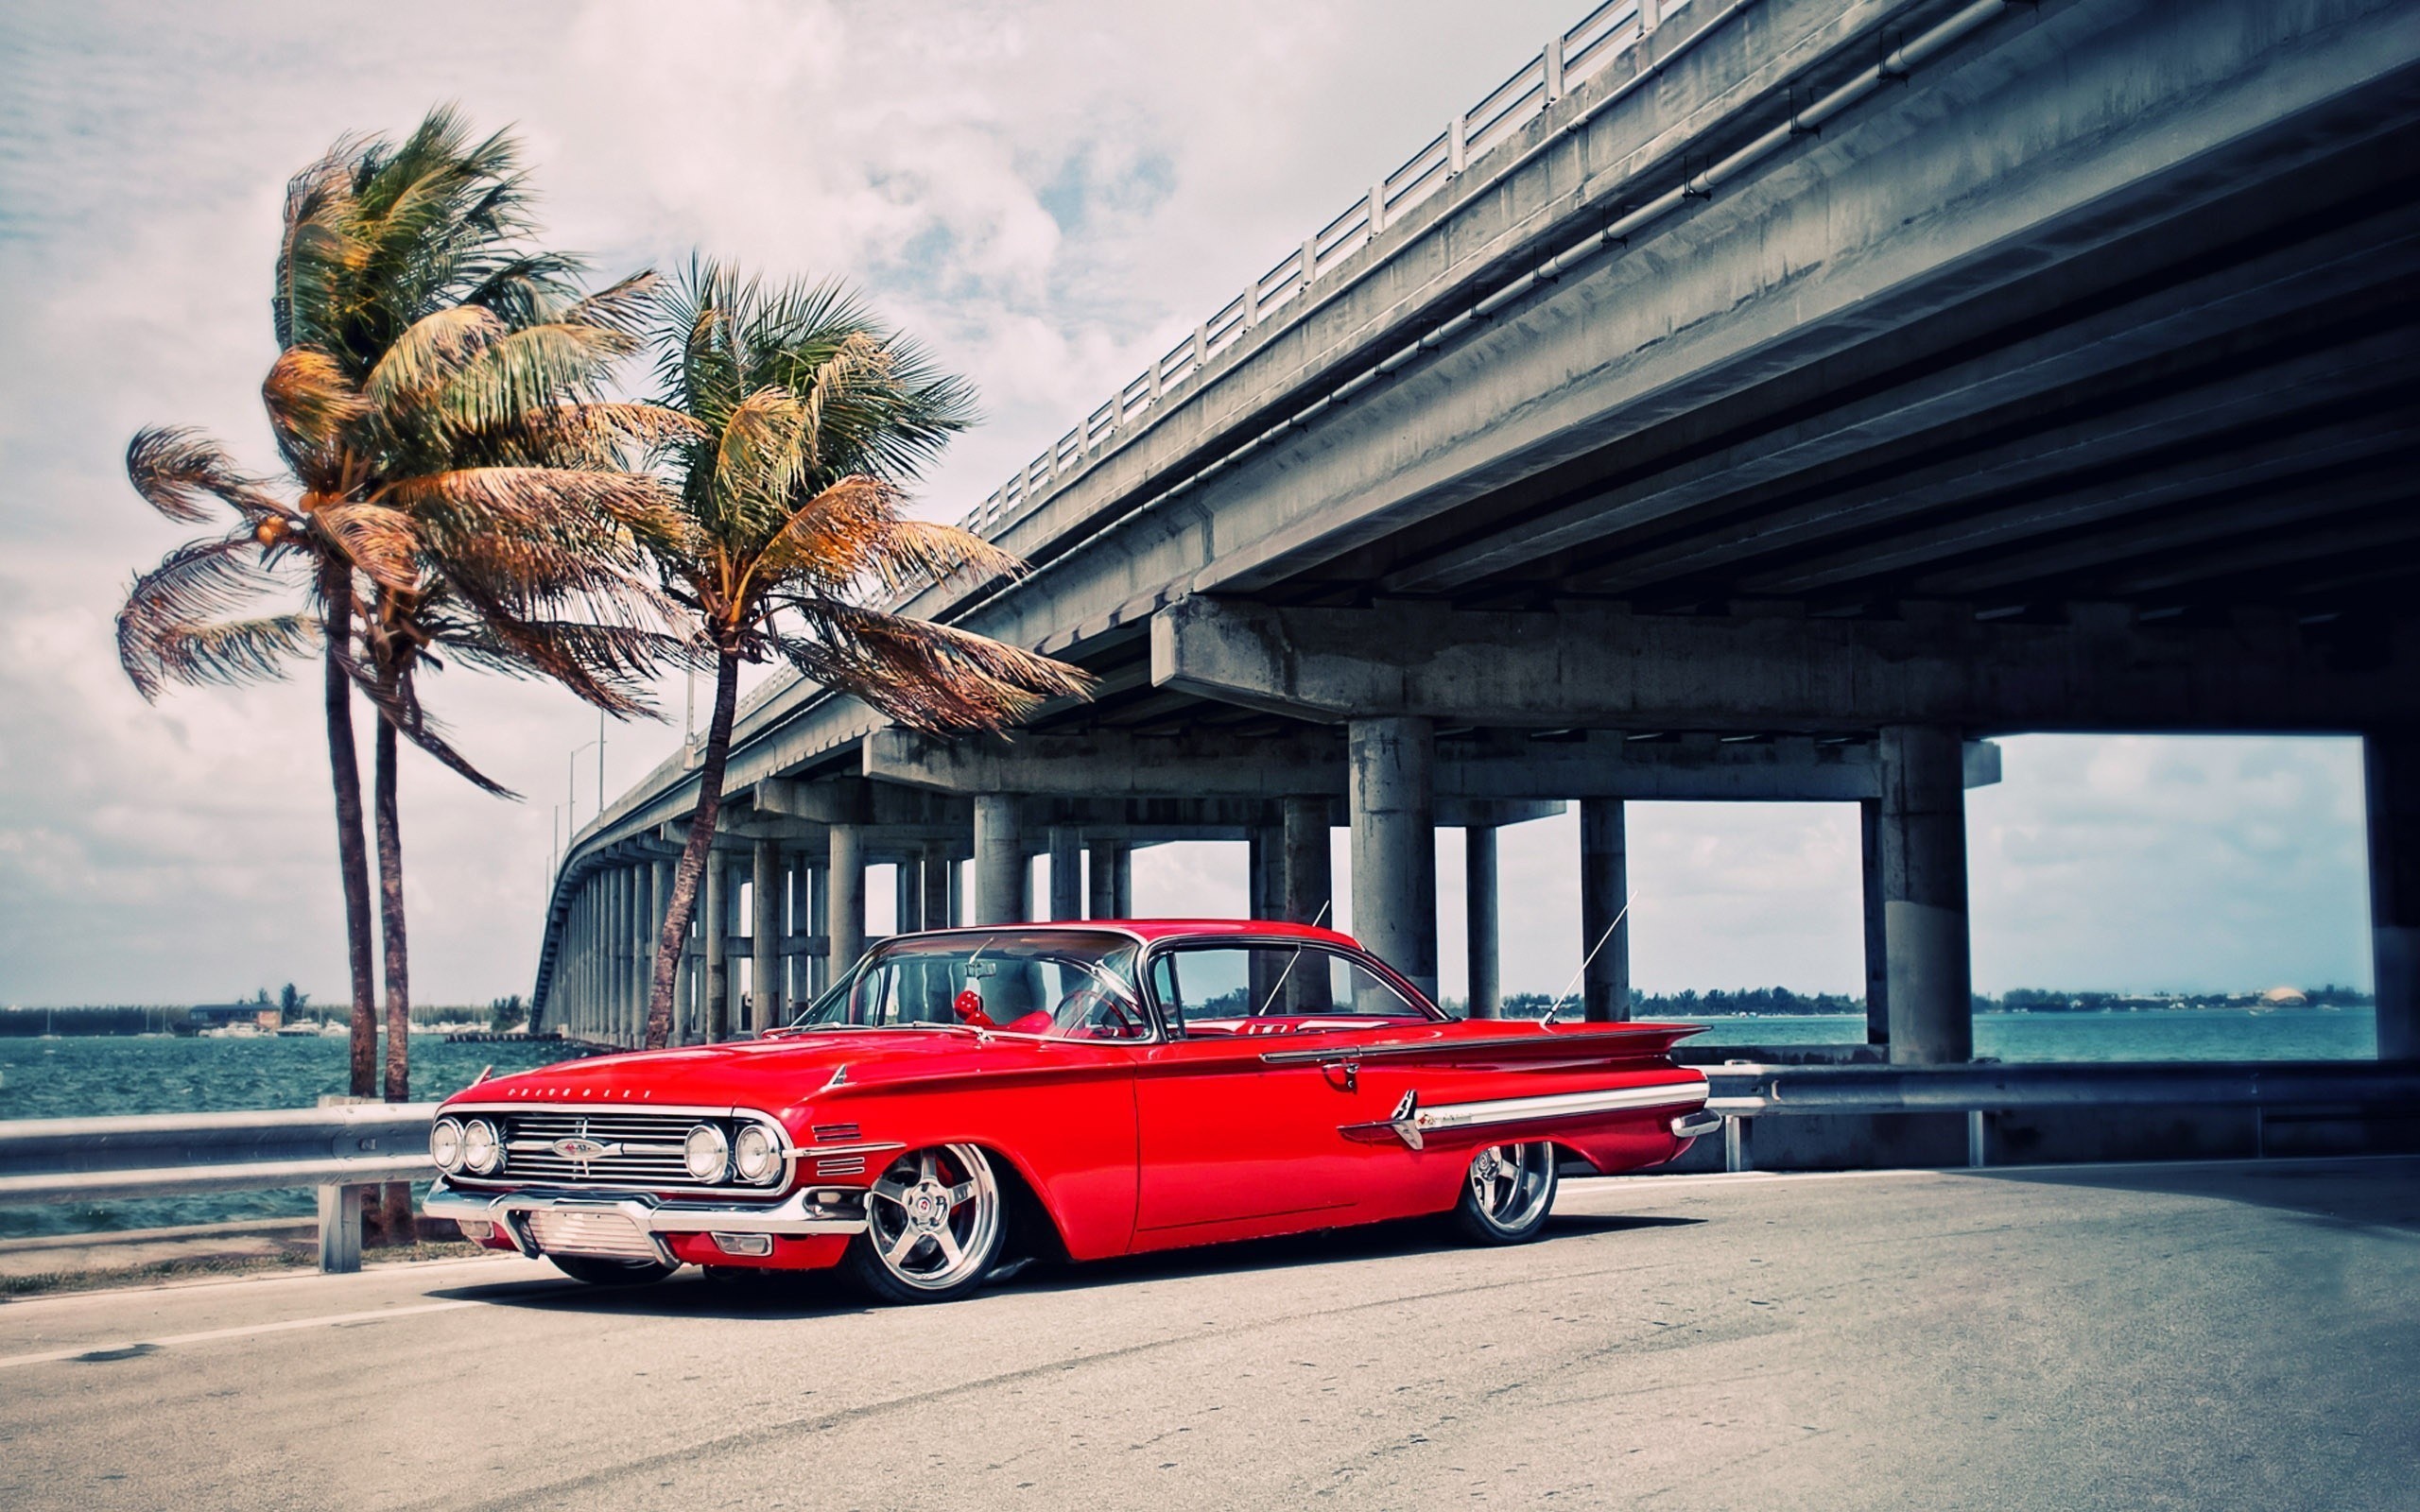 2560x1600 115 Chevrolet Impala Hd Wallpapers Background Images Wallpaper Abyss